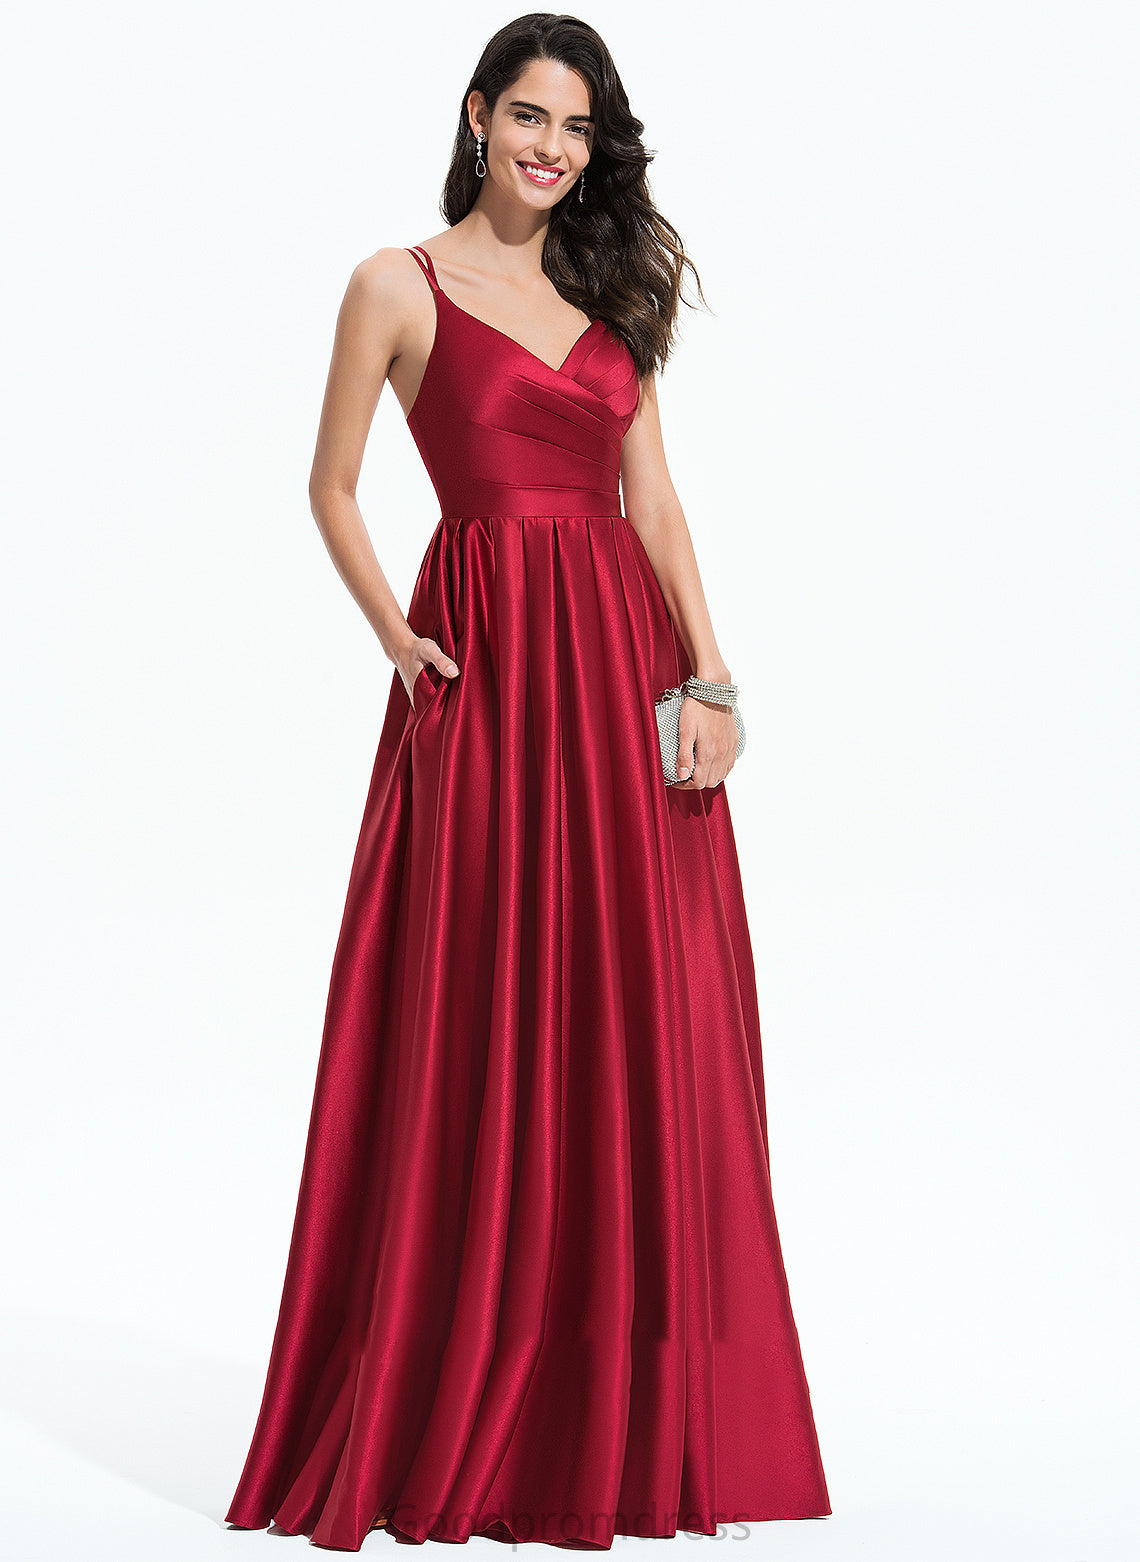 A-Line Pockets Prom Dresses Satin With Floor-Length Ruffle V-neck Kirsten